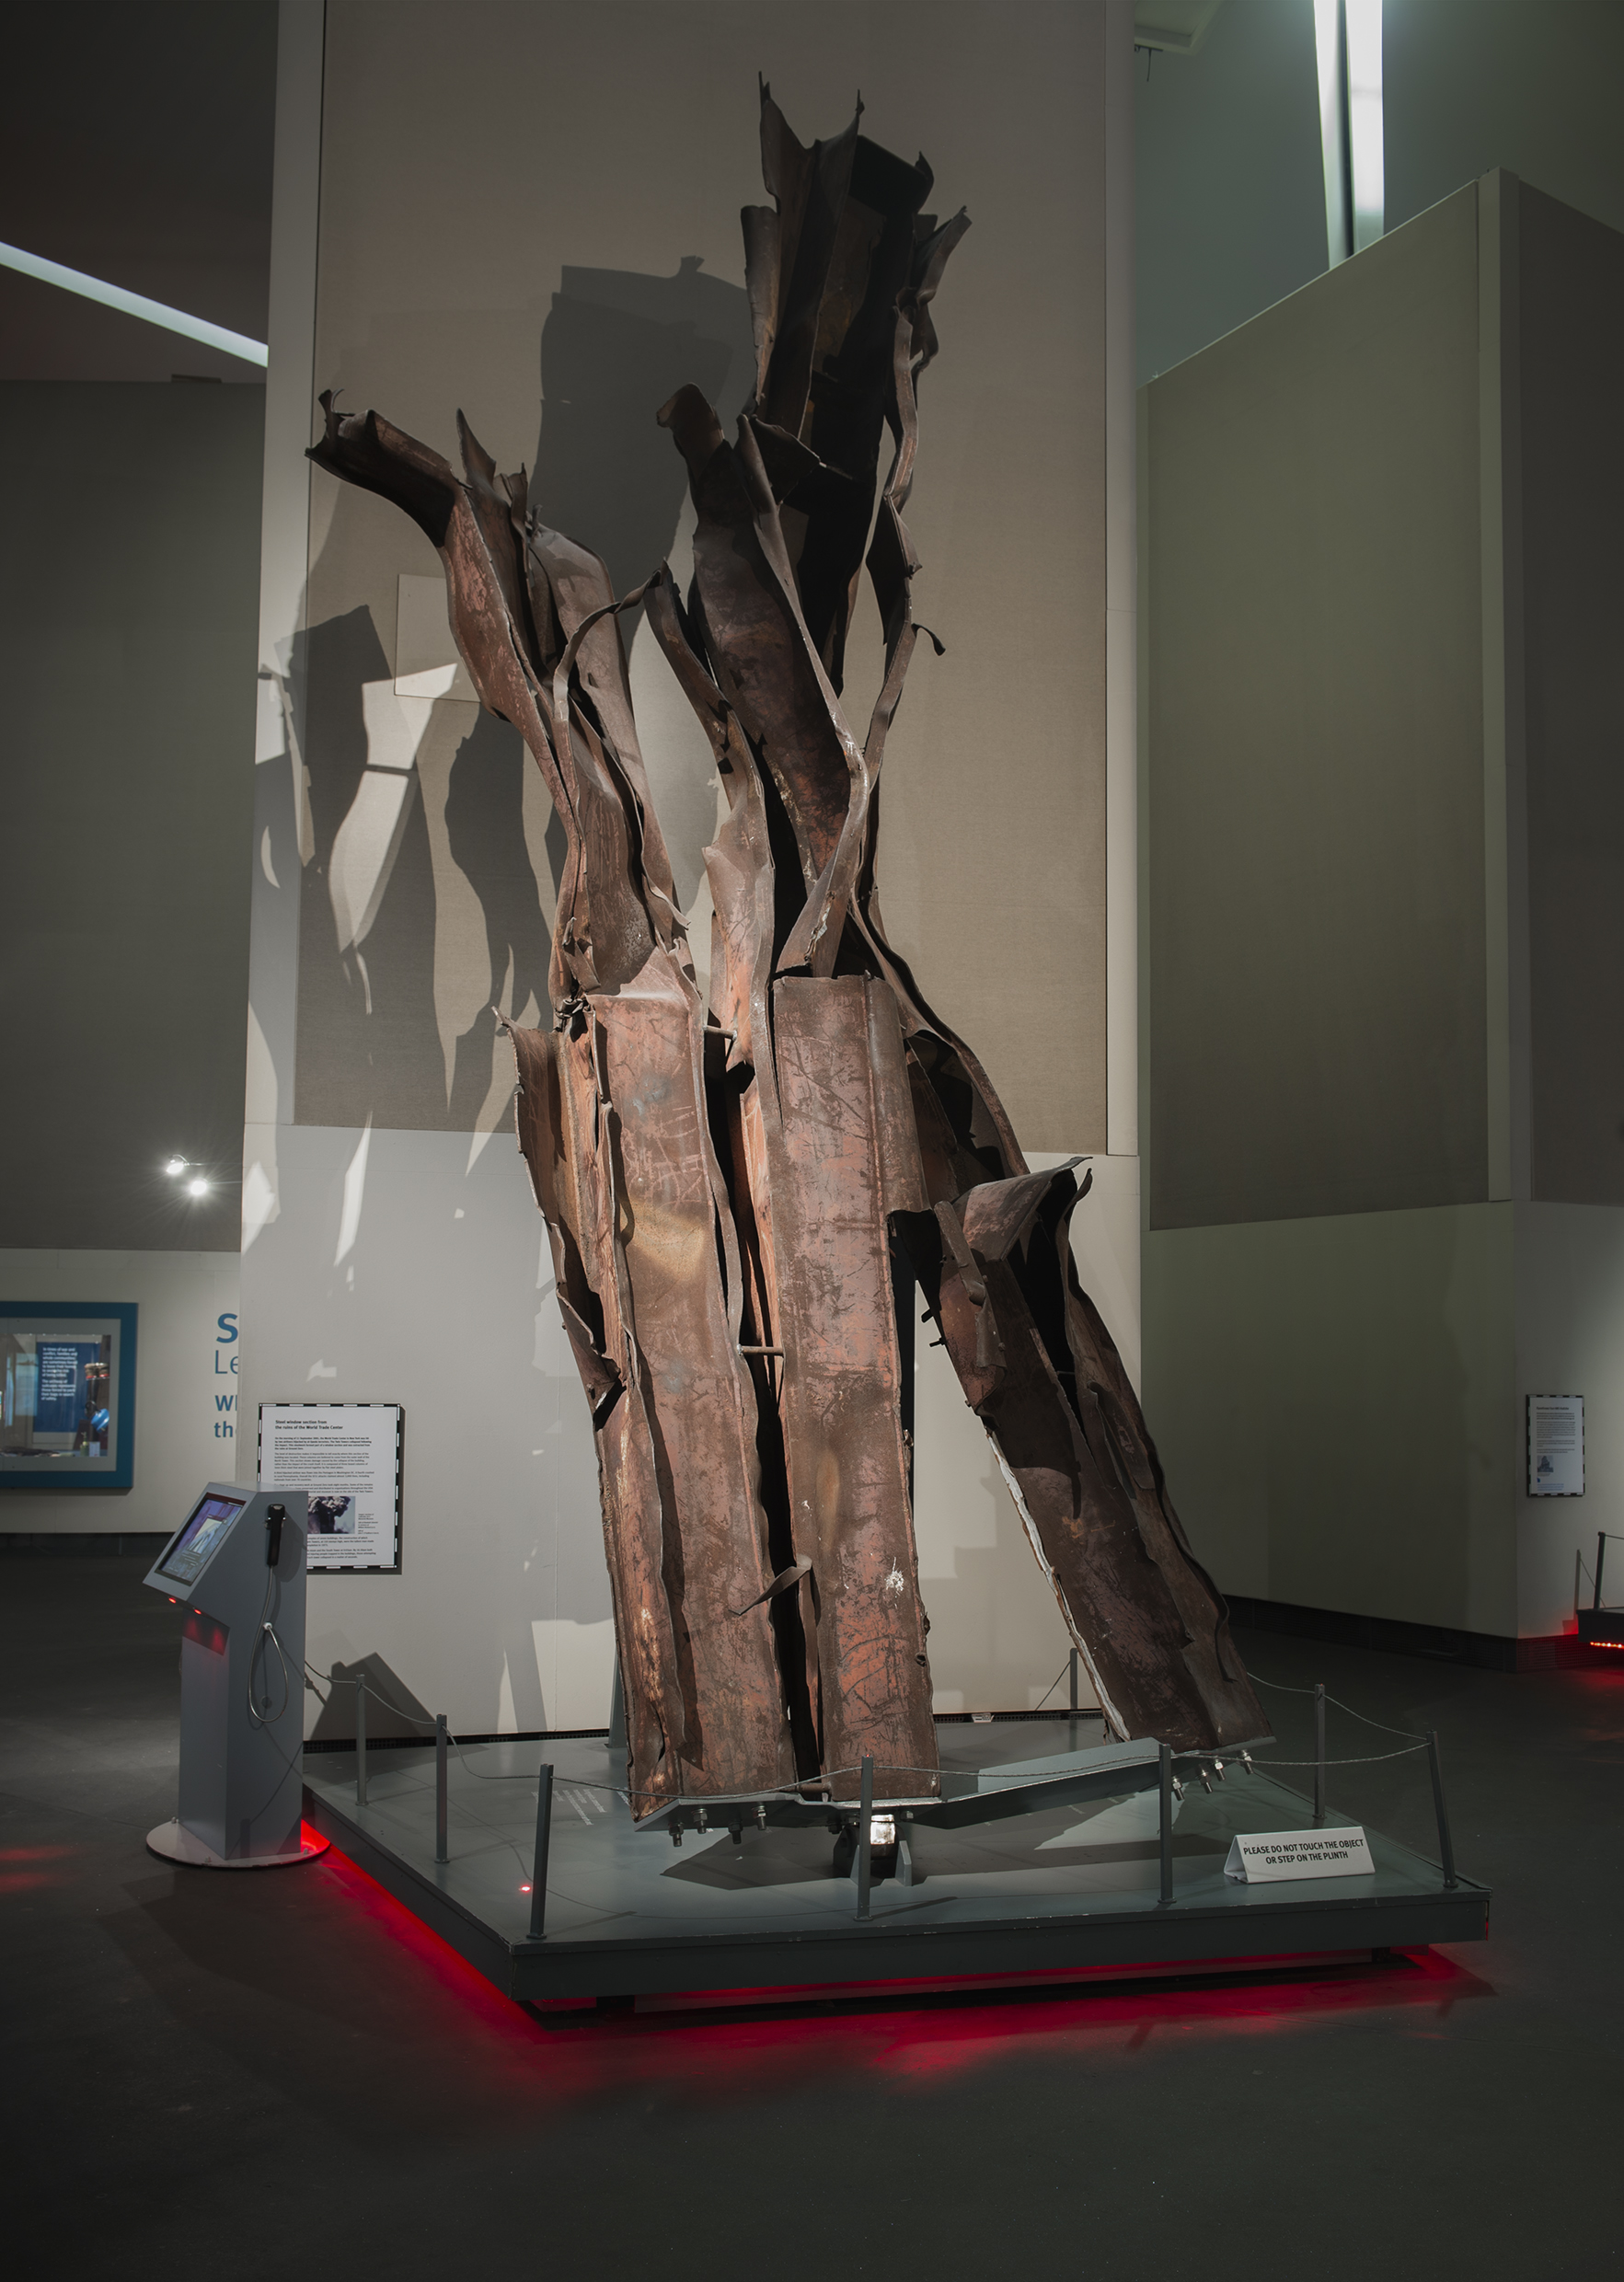 The Wick - General view of Section of steel work, (Obj No EPH 10364.1) from one of the Twin Towers involved in the 911 terrorist attack in New York, in the Main Exhibition Space at IWM North. Section of twisted and rusted steelwork from the collapsed World Trade Center, New York.   The twin towers, which opened on 4 April 1973, were at the time of their construction the tallest buildings in the world.   On the morning of 11 September 2001, hijackers affiliated with the Al-Qaeda organisation flew two Boeing 767 jets into the complex, beginning with the North Tower at 8:46am, then the South Tower 17 minutes later, in a coordinated act of terrorism.  After burning for almost an hour, the South Tower collapsed, followed by the North Tower 29 minutes later.  The attacks on the World Trade Center killed 2,606 people in and within the vicinity of the towers, as well as all 157 on board the two aircraft.  This particular piece of steelwork comprises beams from the external walls of the building, and was originally located somewhere around one of the two impact zones. Photographed 24th January 2017.